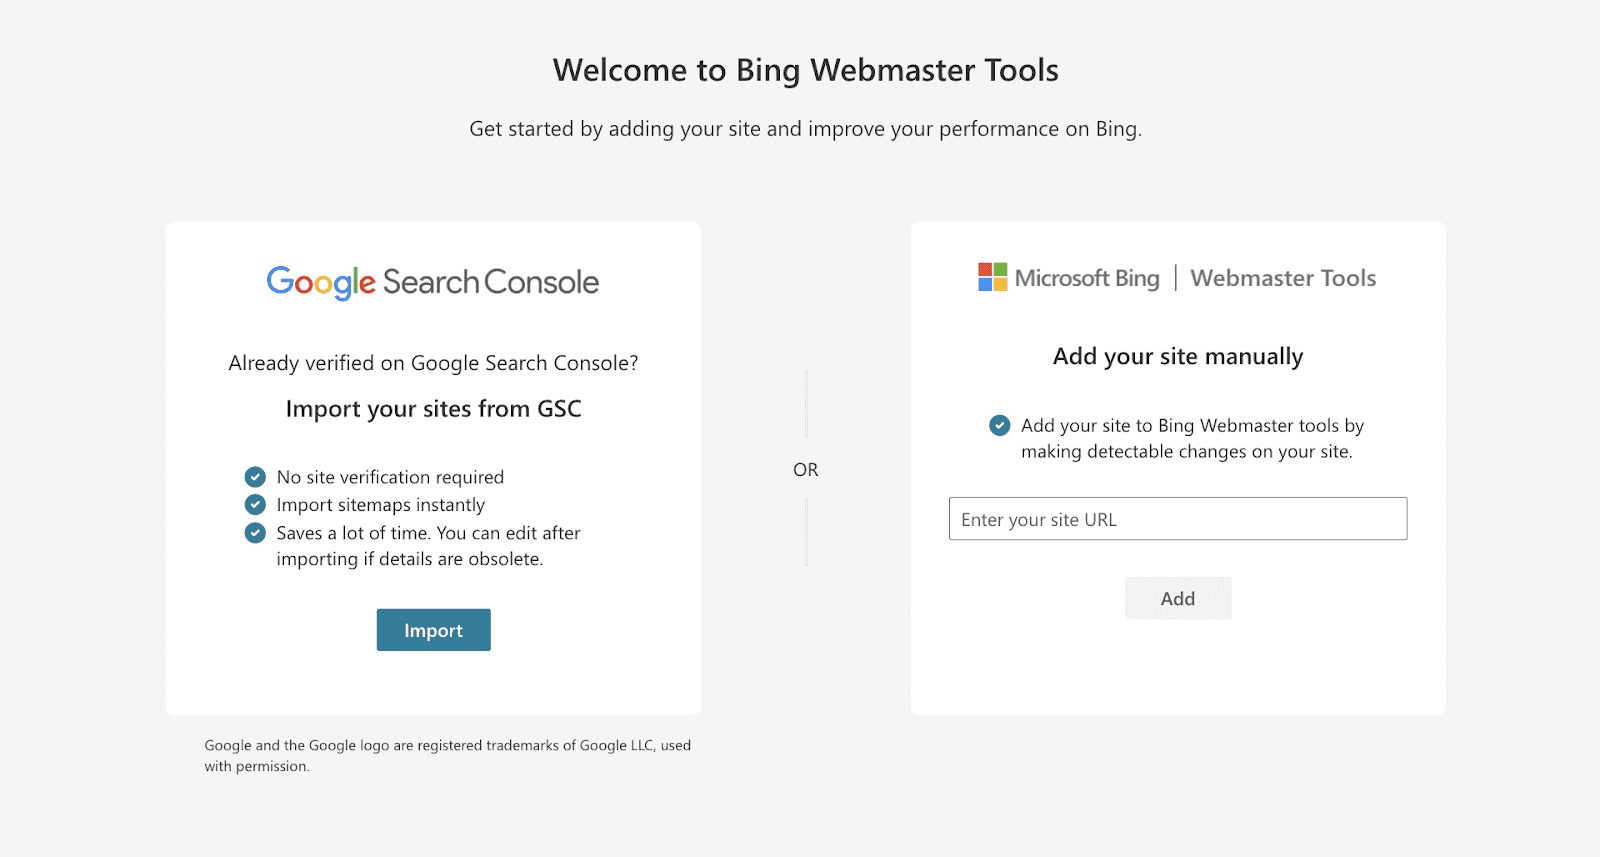 How to add a website to Bing